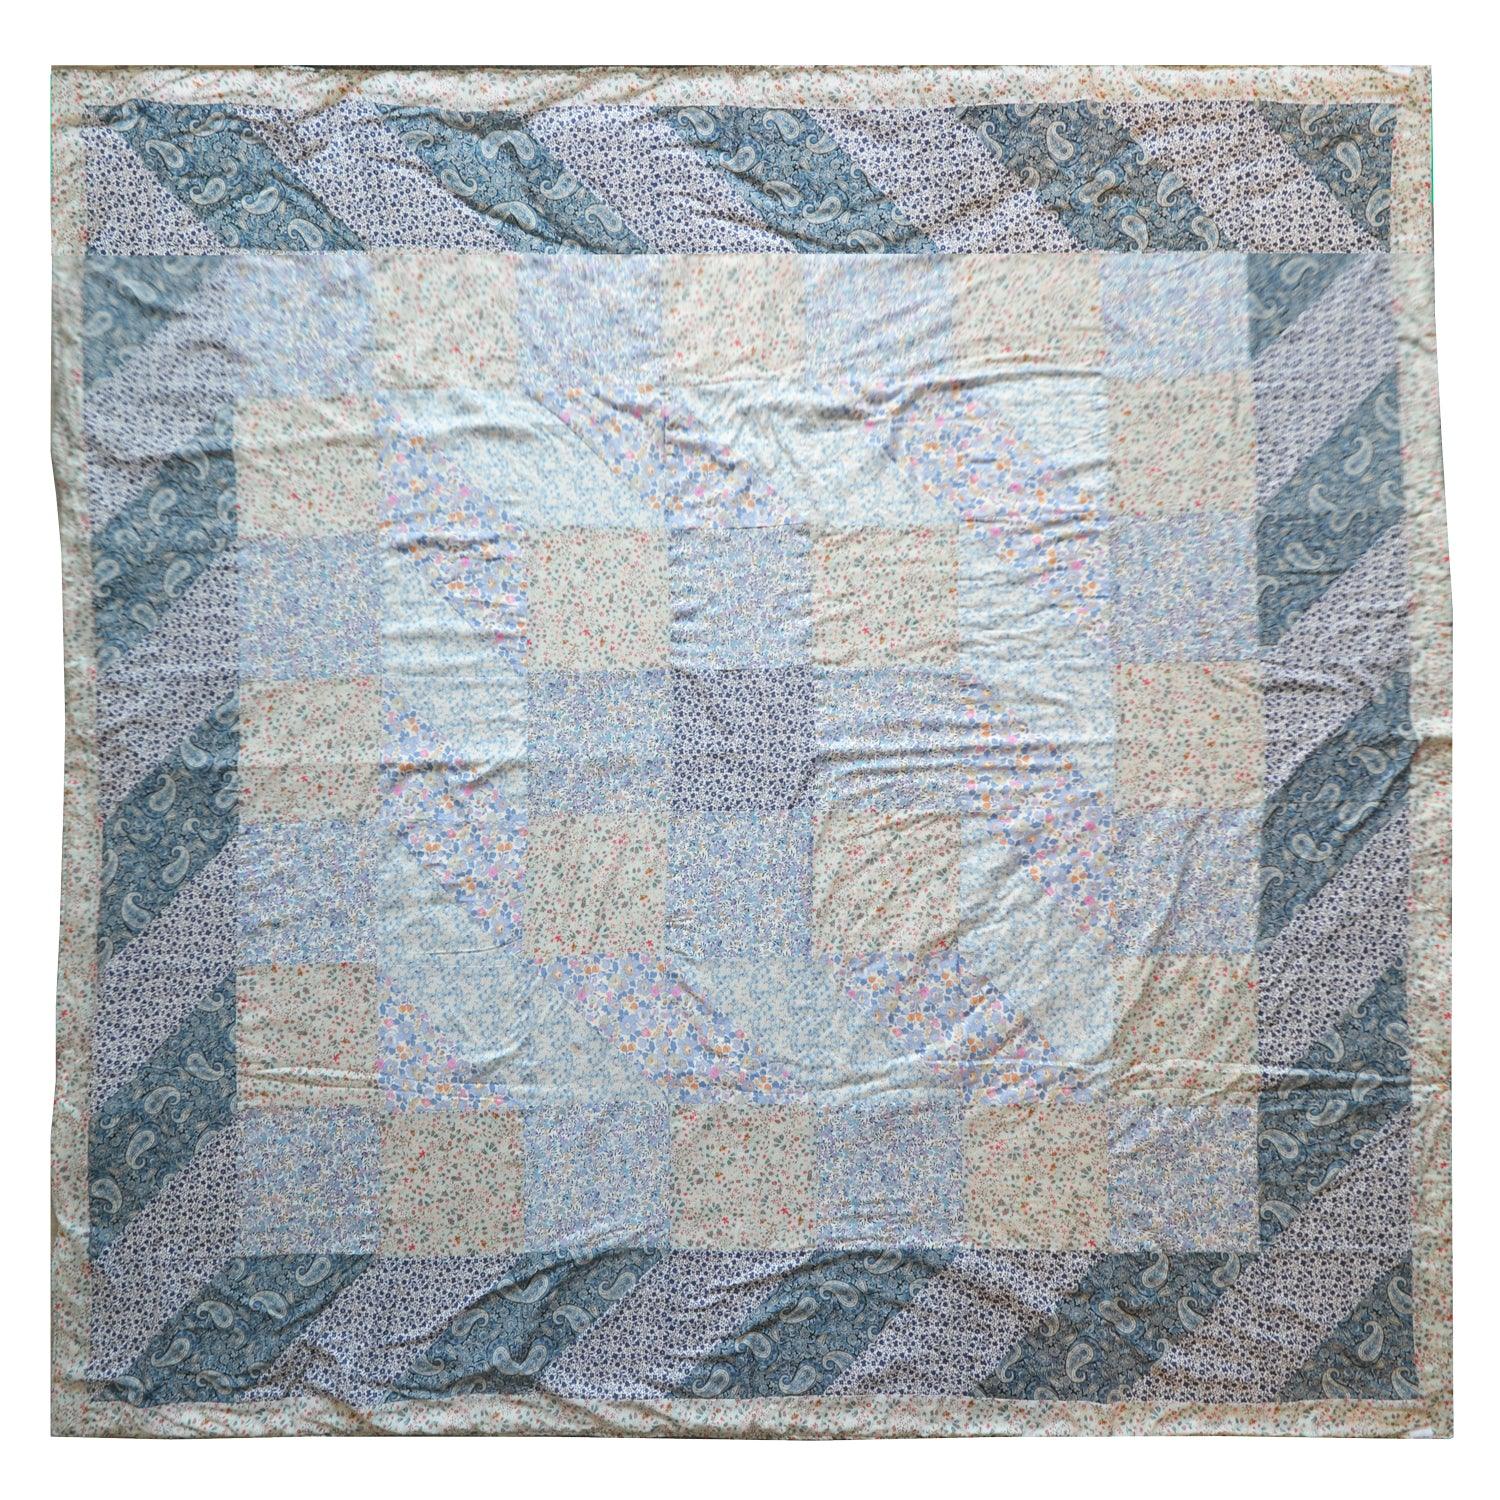 Unique One-Off Patchwork Bedspread made with Blue Liberty Fabrics - Coco & Wolf